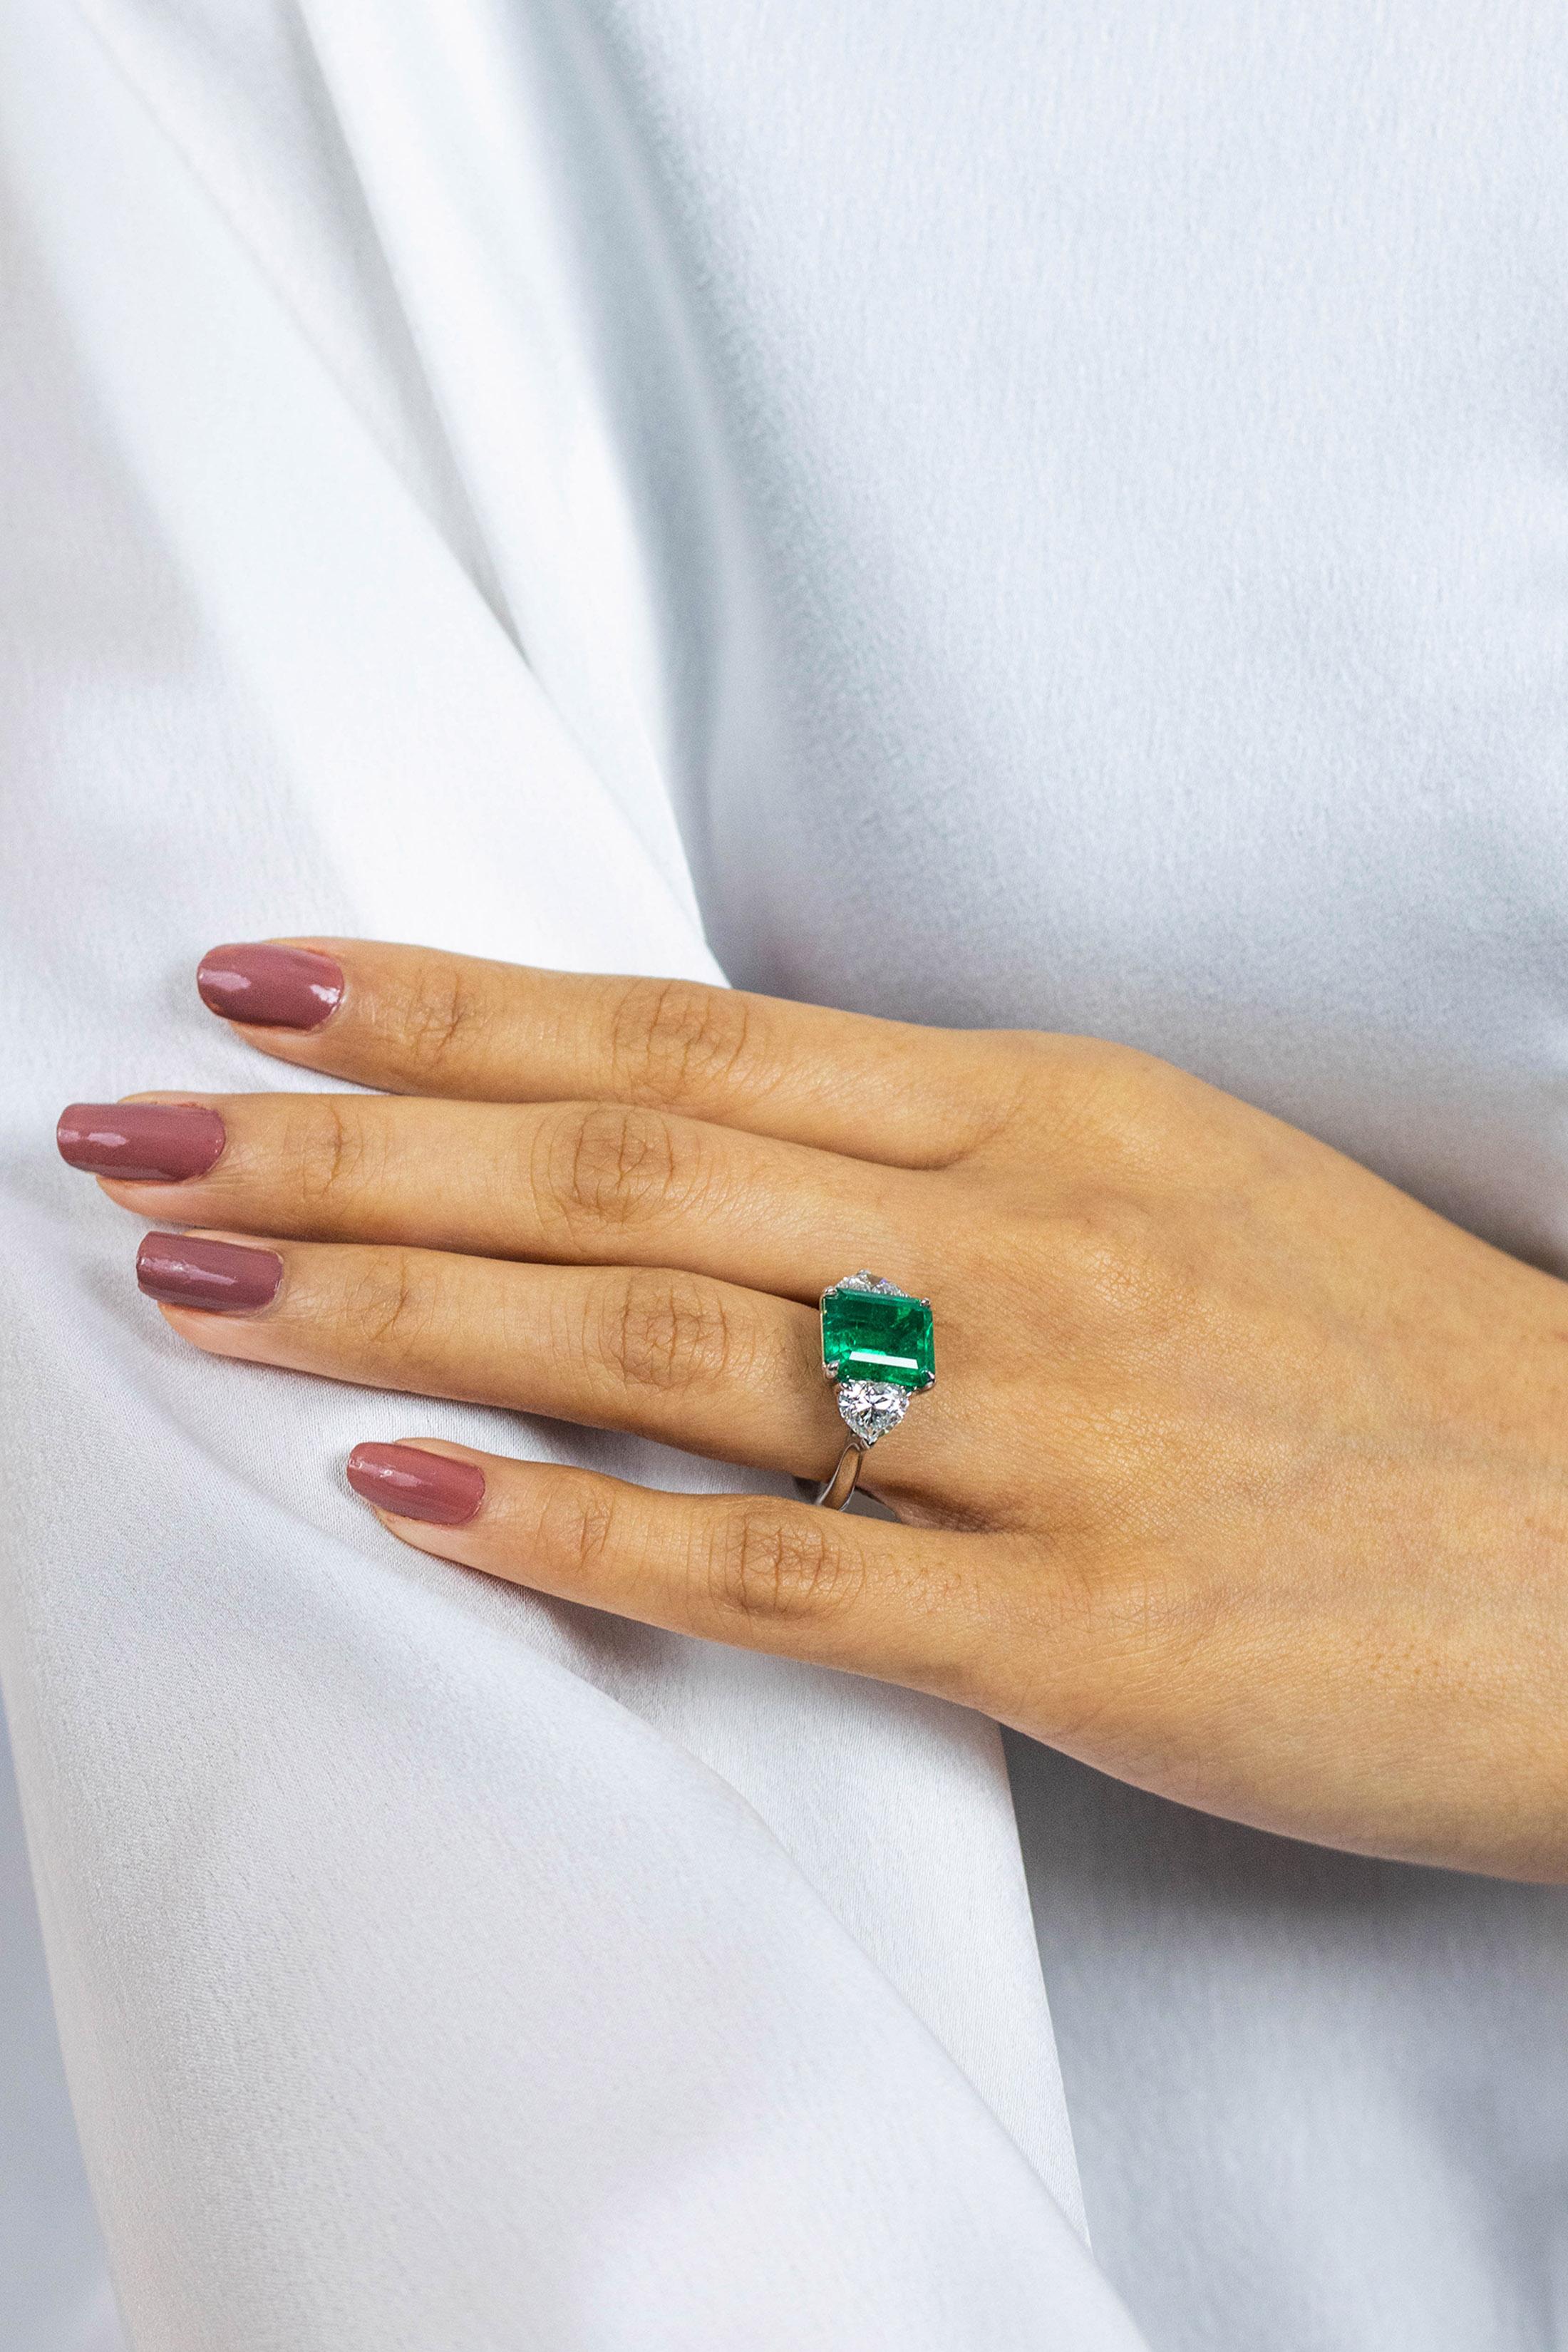 GIA Certified 4.46 Carat Emerald Cut Colombian Emerald & Diamond Engagement Ring In New Condition For Sale In New York, NY